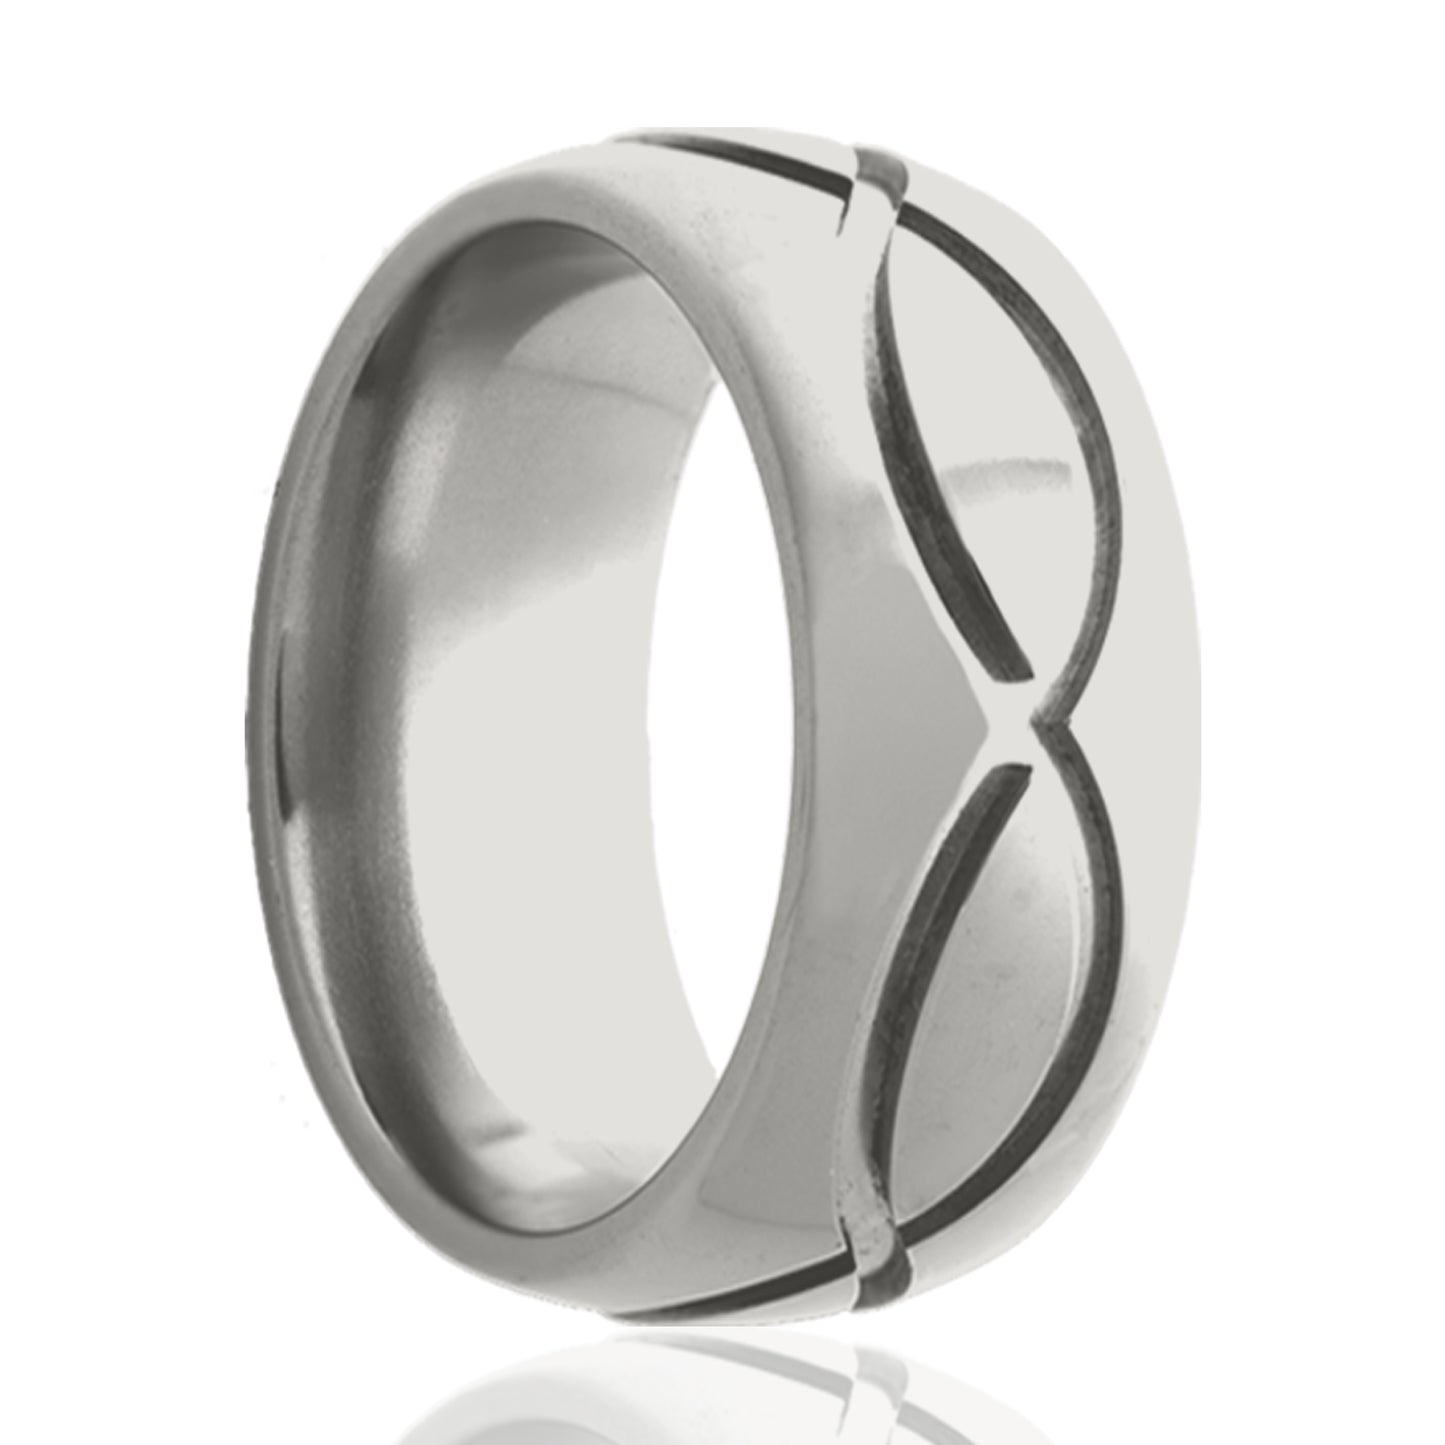 A infinity waves domed cobalt wedding band displayed on a neutral white background.